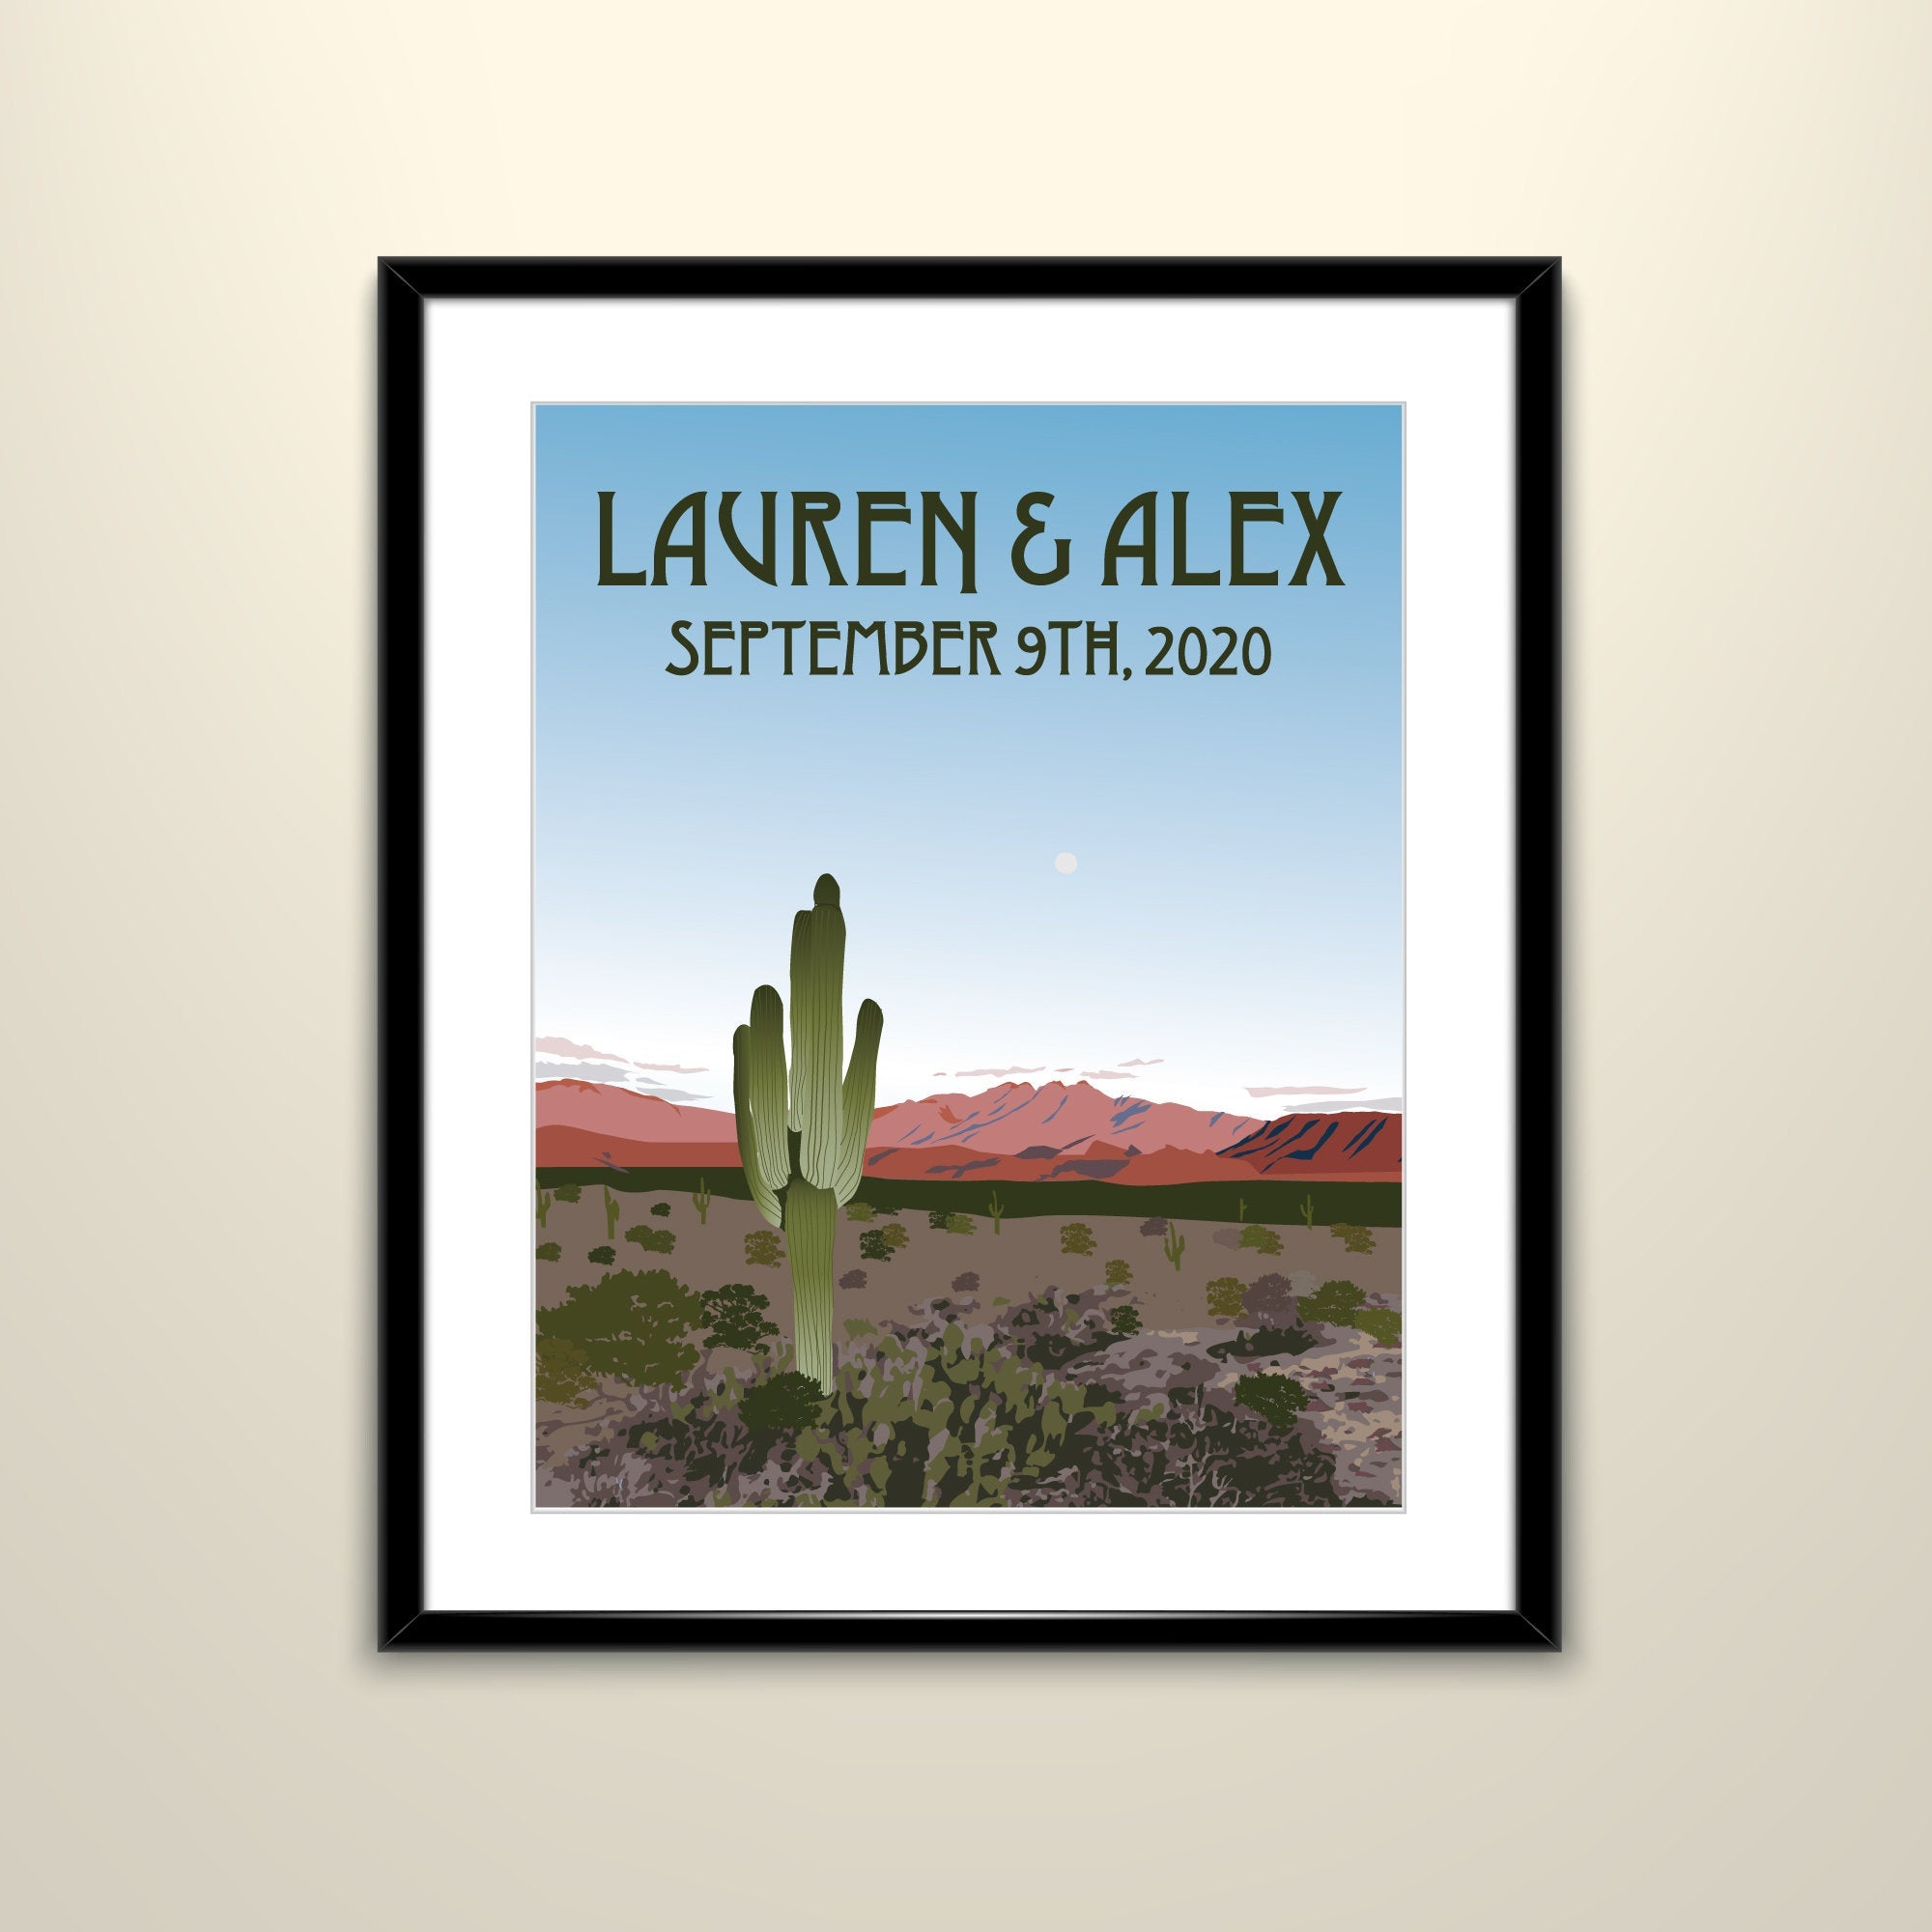 Four Peaks Mountain Arizona, Desert with Cactus - Travel 11x14 Poster - Personalized Wedding Poster (Frame not Included)